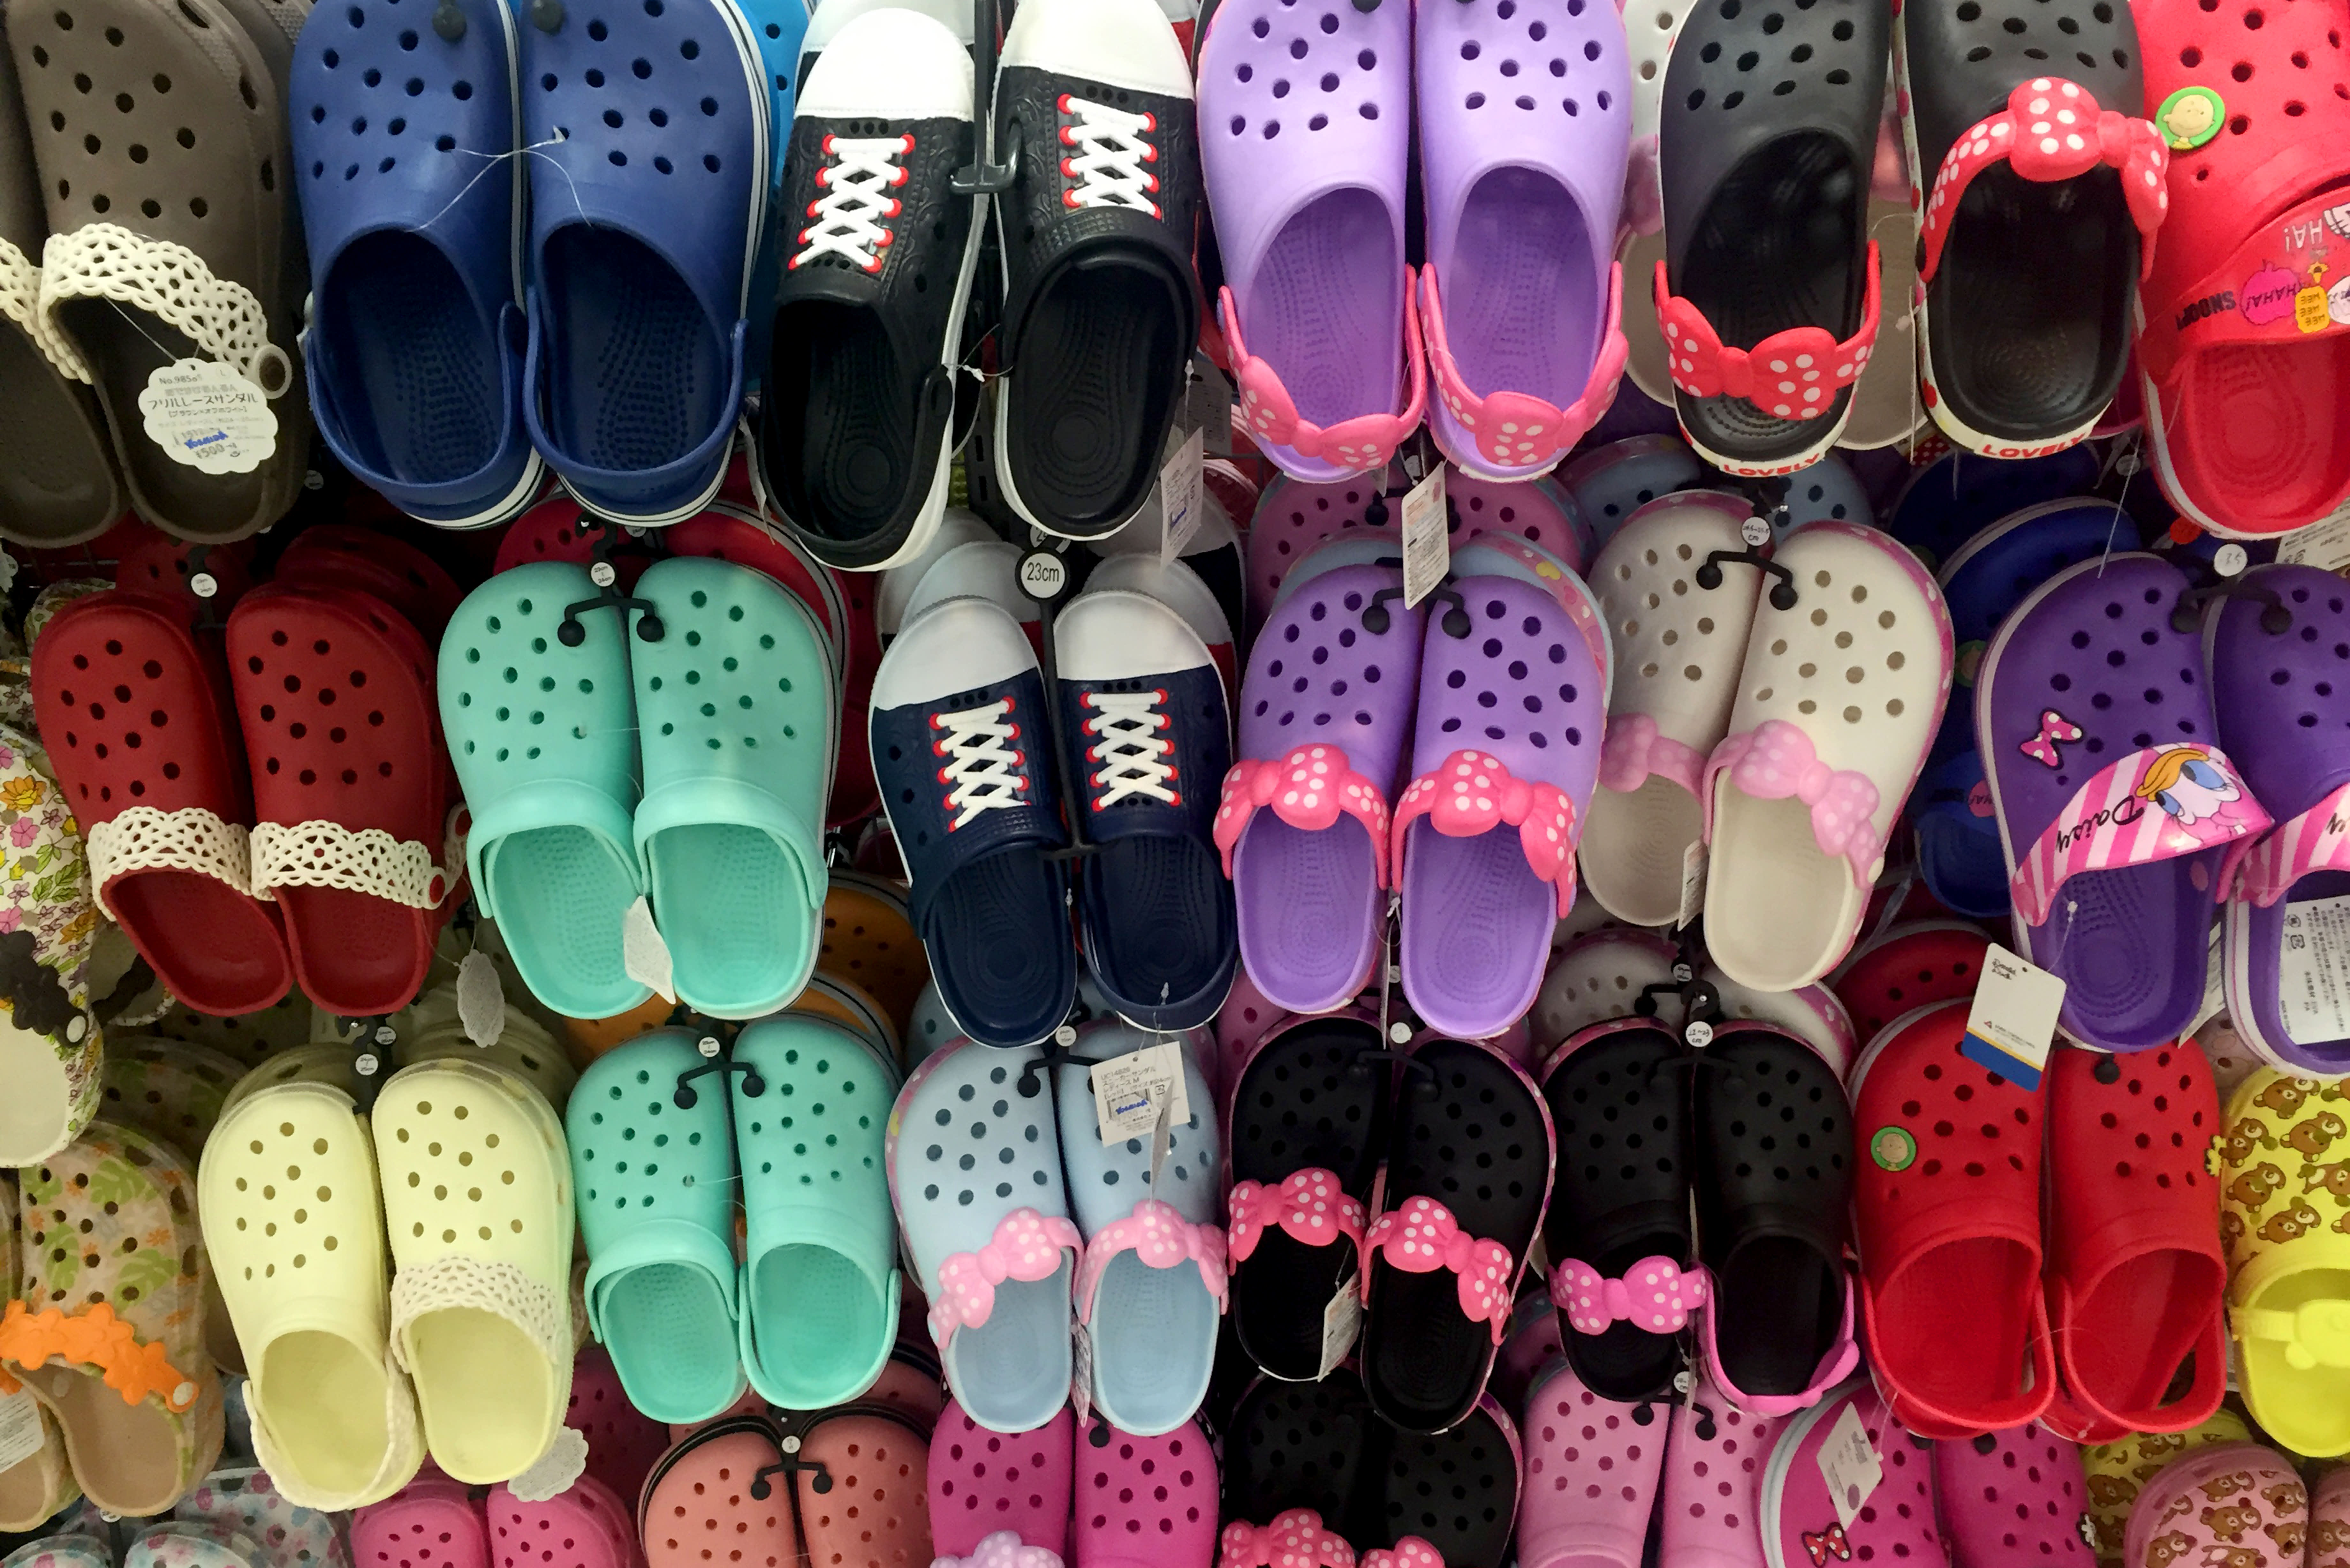 Crocs CEO Andrew Rees is optimistic that the shoe brand could grow after the pandemic